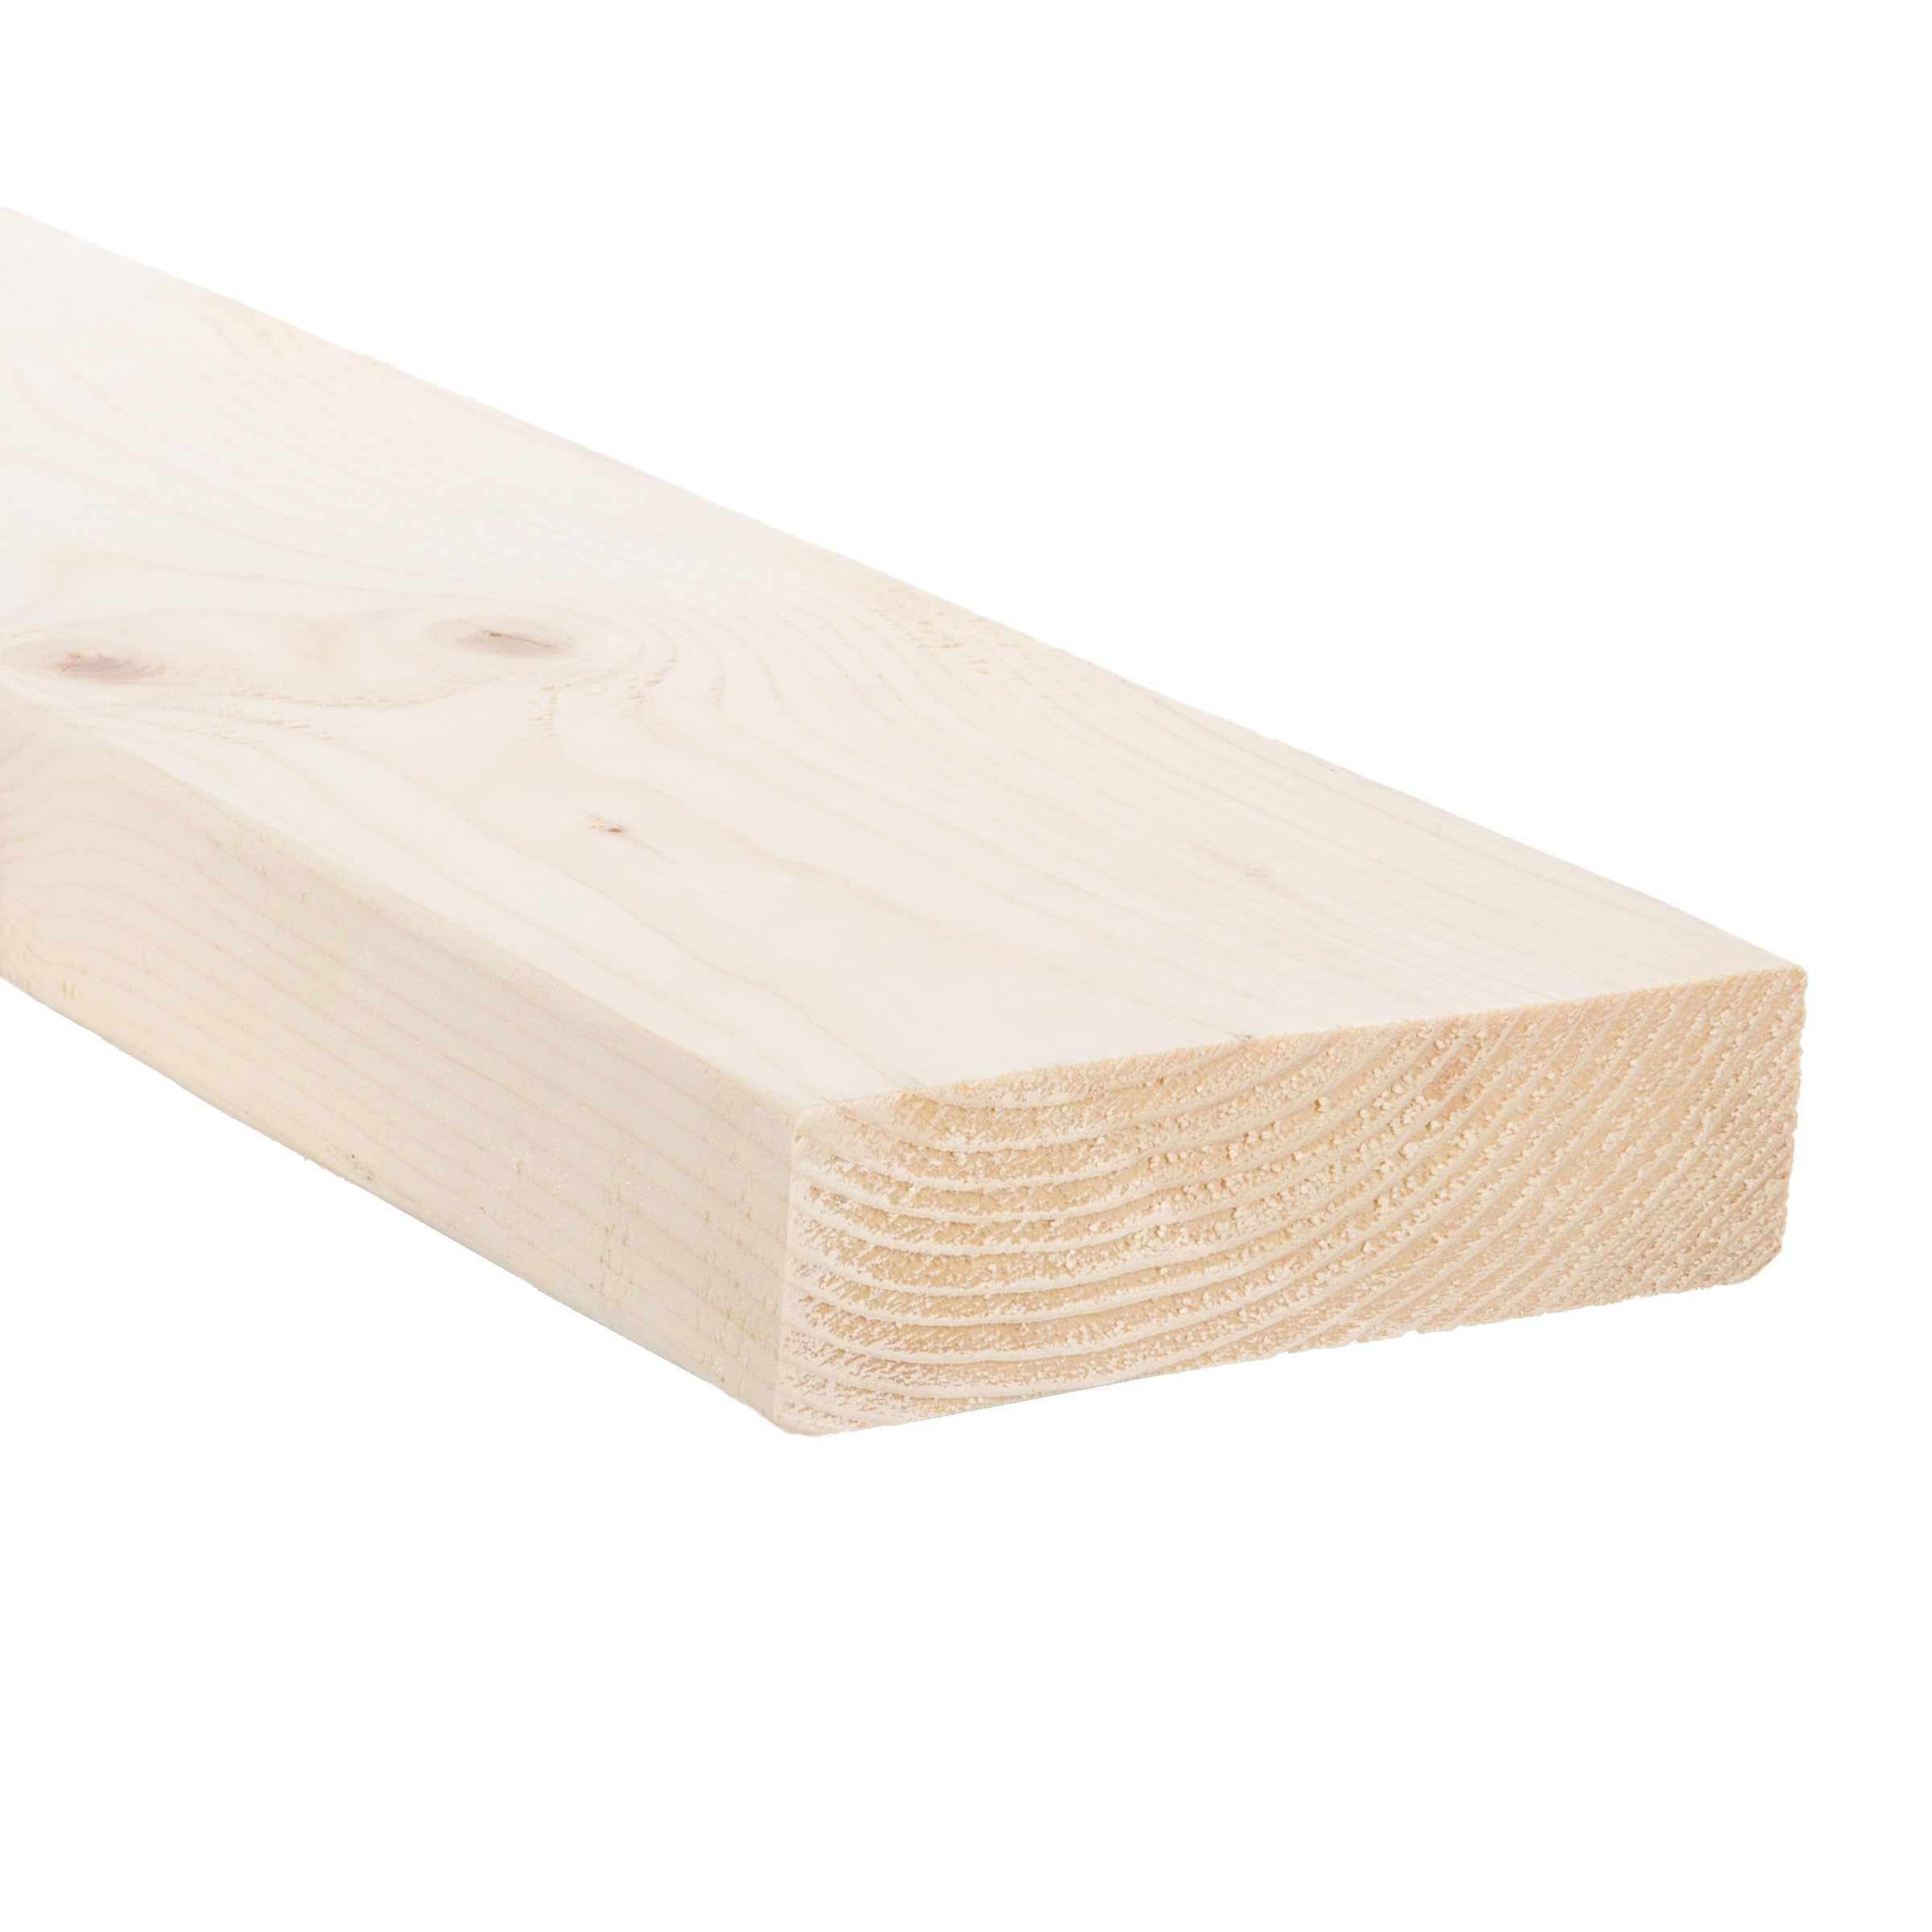 2-in X 6-in X 10-ft Fir Kiln-dried Lumber In The, 40% OFF